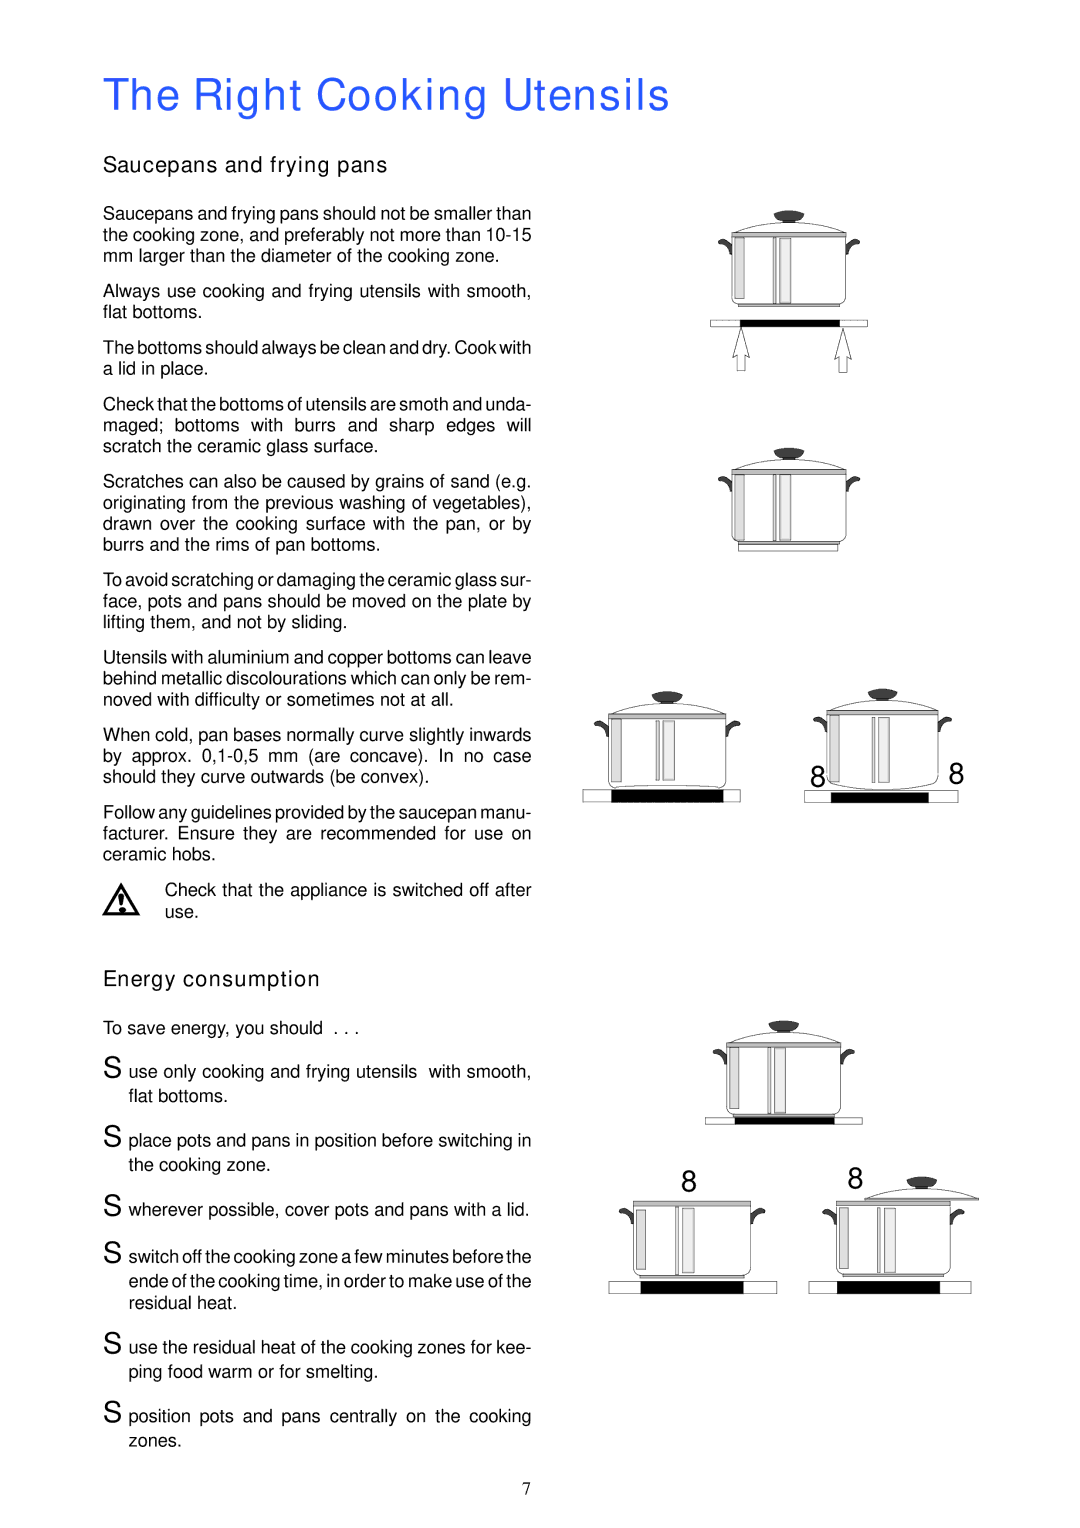 Electrolux U20452 manual Right Cooking Utensils, Saucepans and frying pans, Energy consumption 